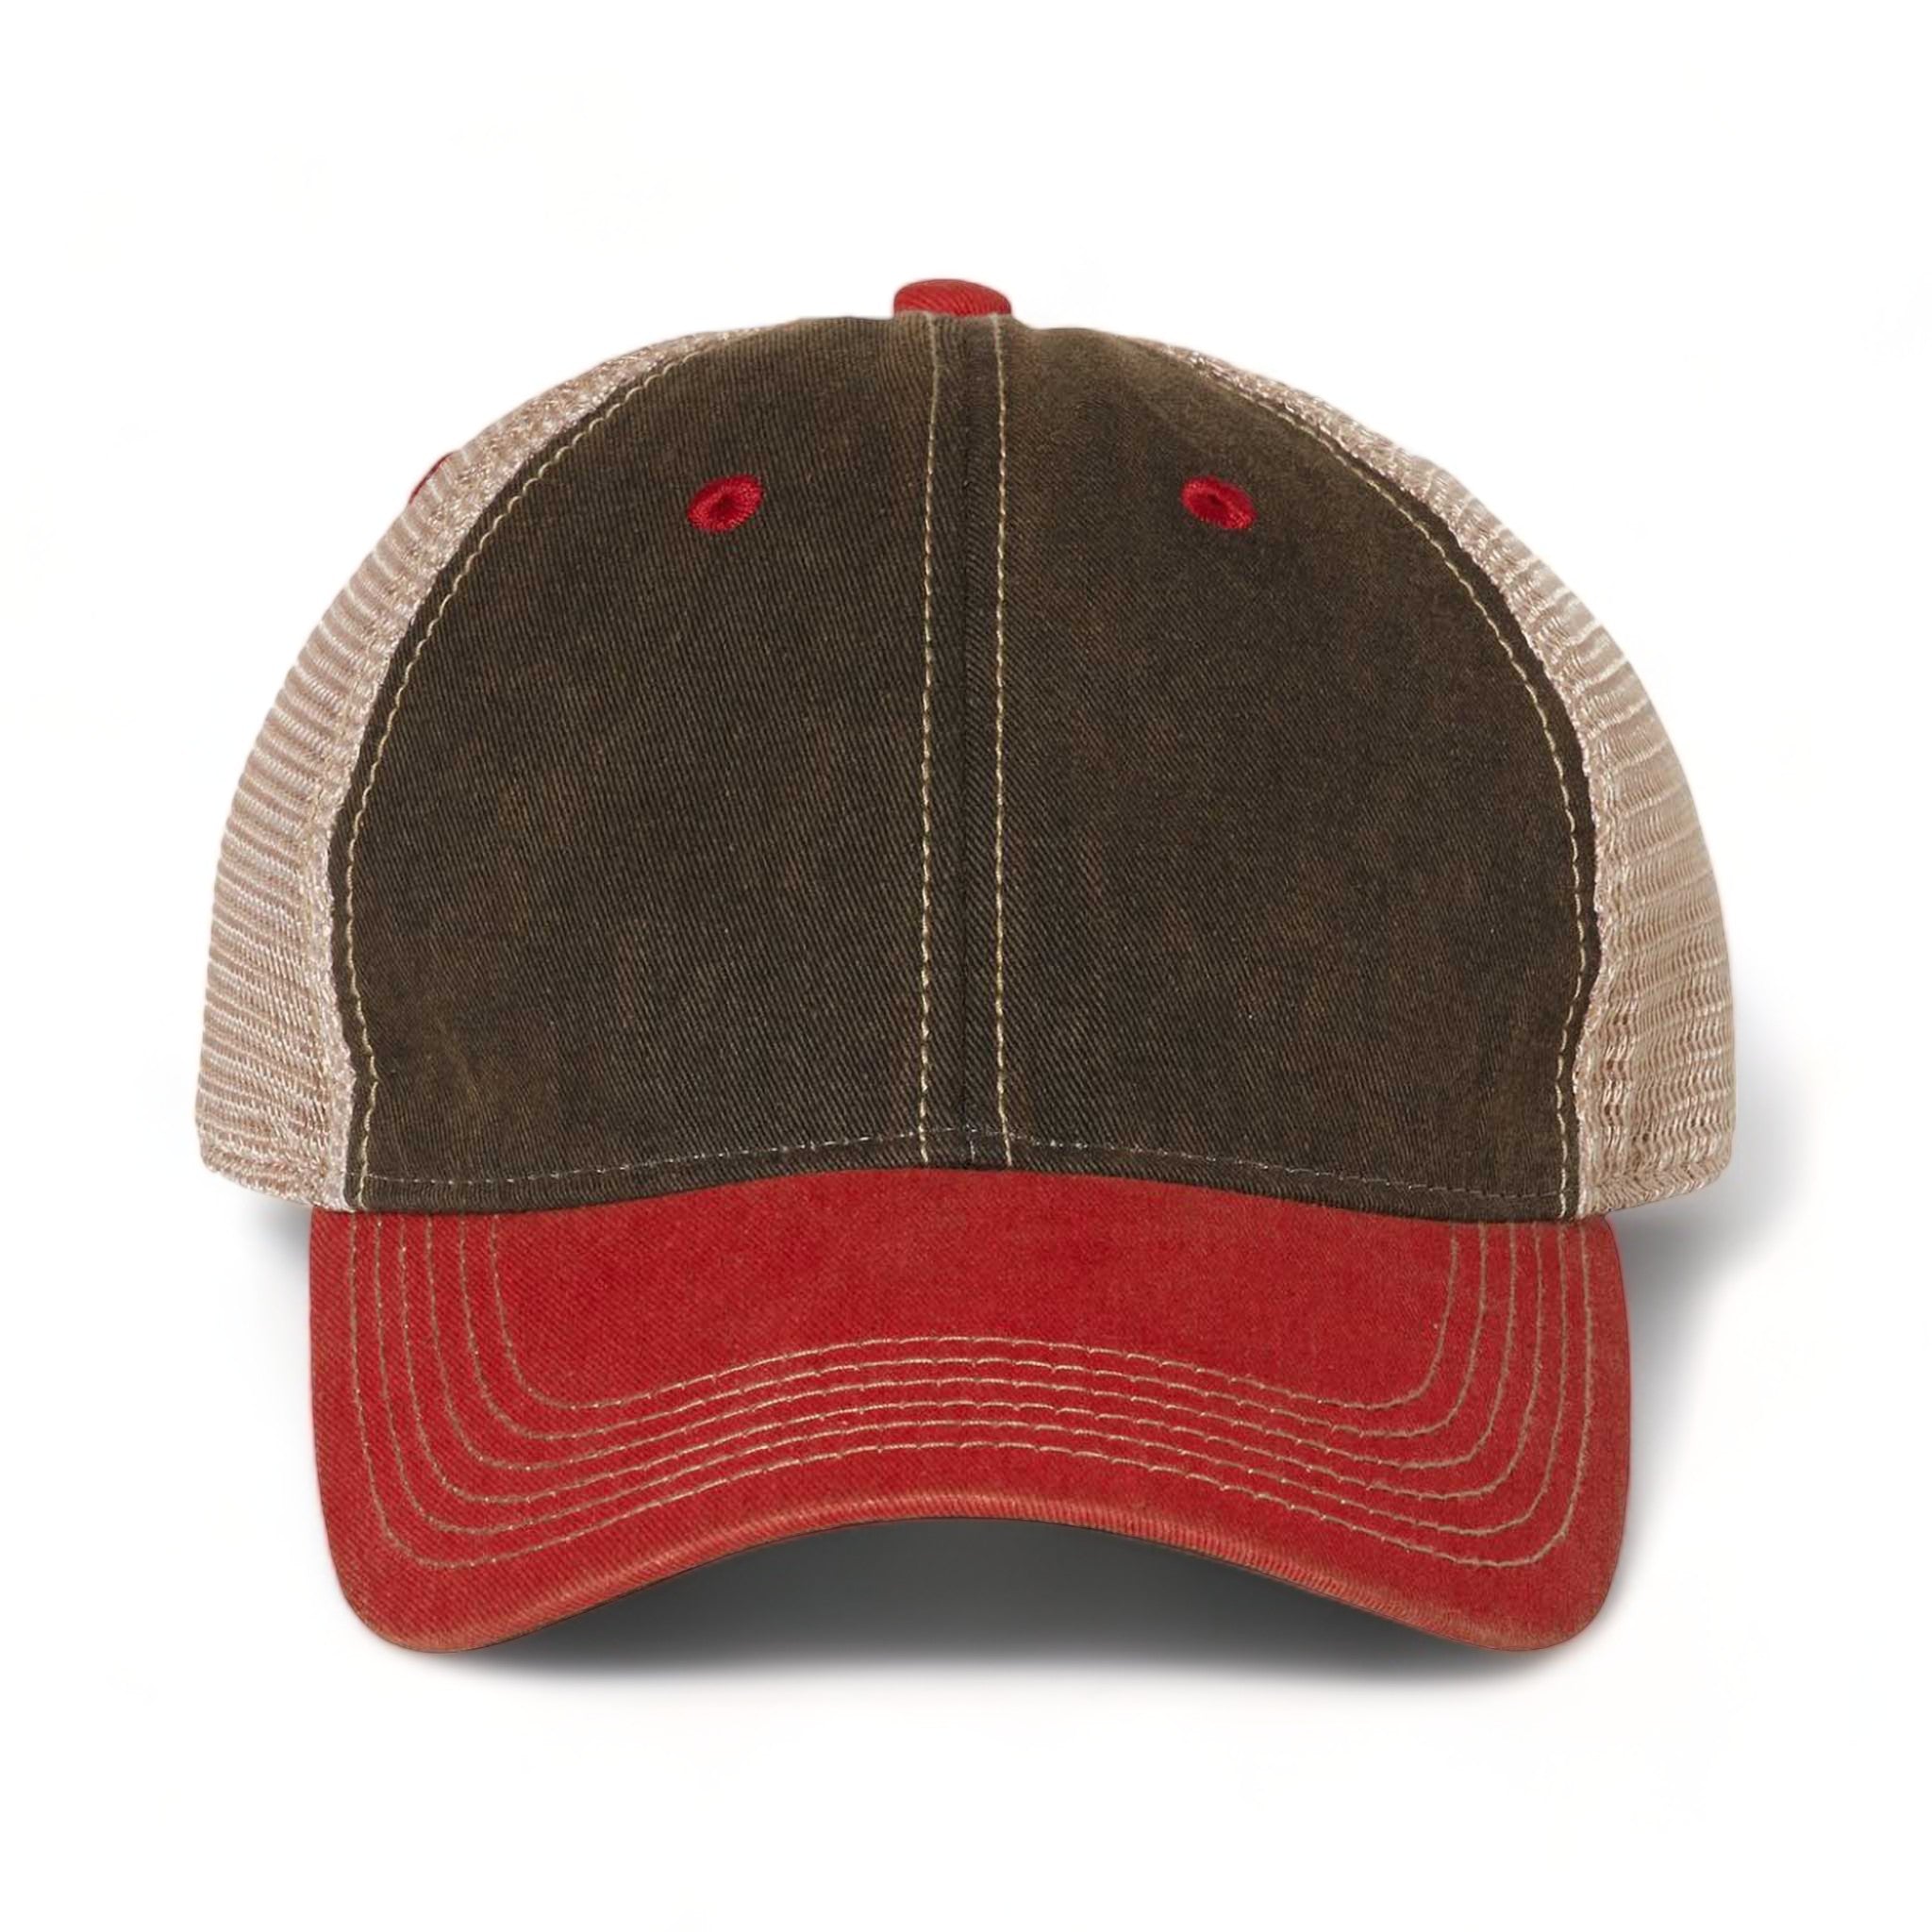 Front view of LEGACY OFA custom hat in black, scarlet red and khaki